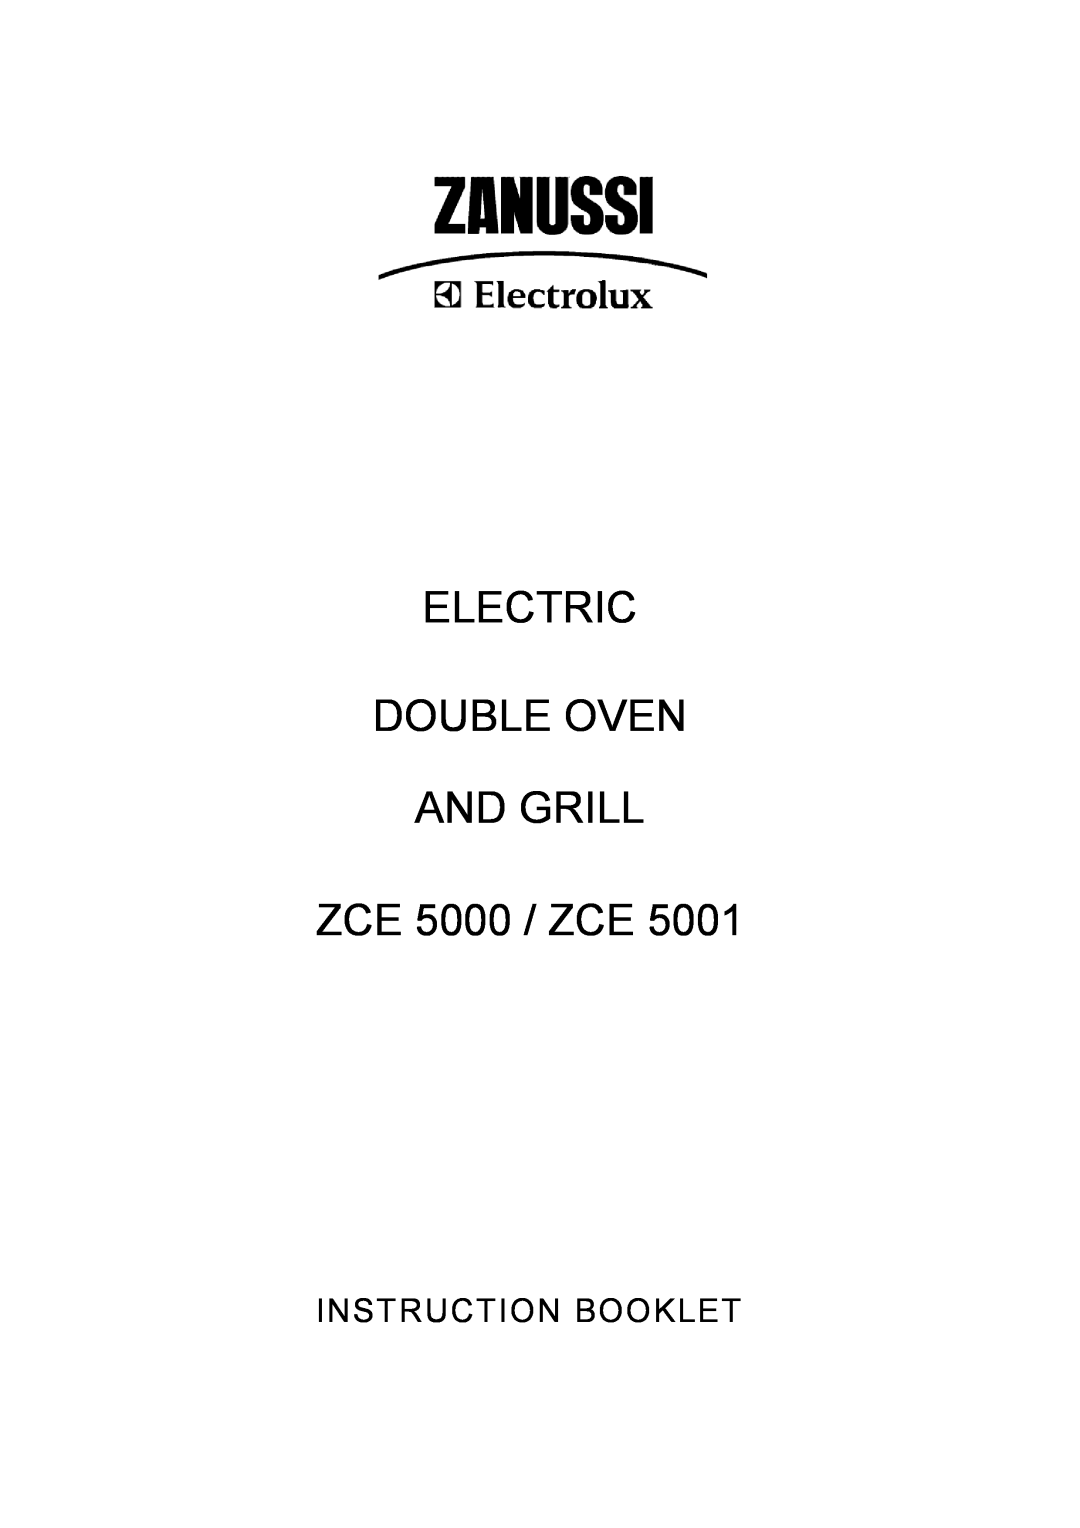 Zanussi ZCE 5001 manual ELECTRIC DOUBLE OVEN AND GRILL ZCE 5000 / ZCE, Instruction Booklet 